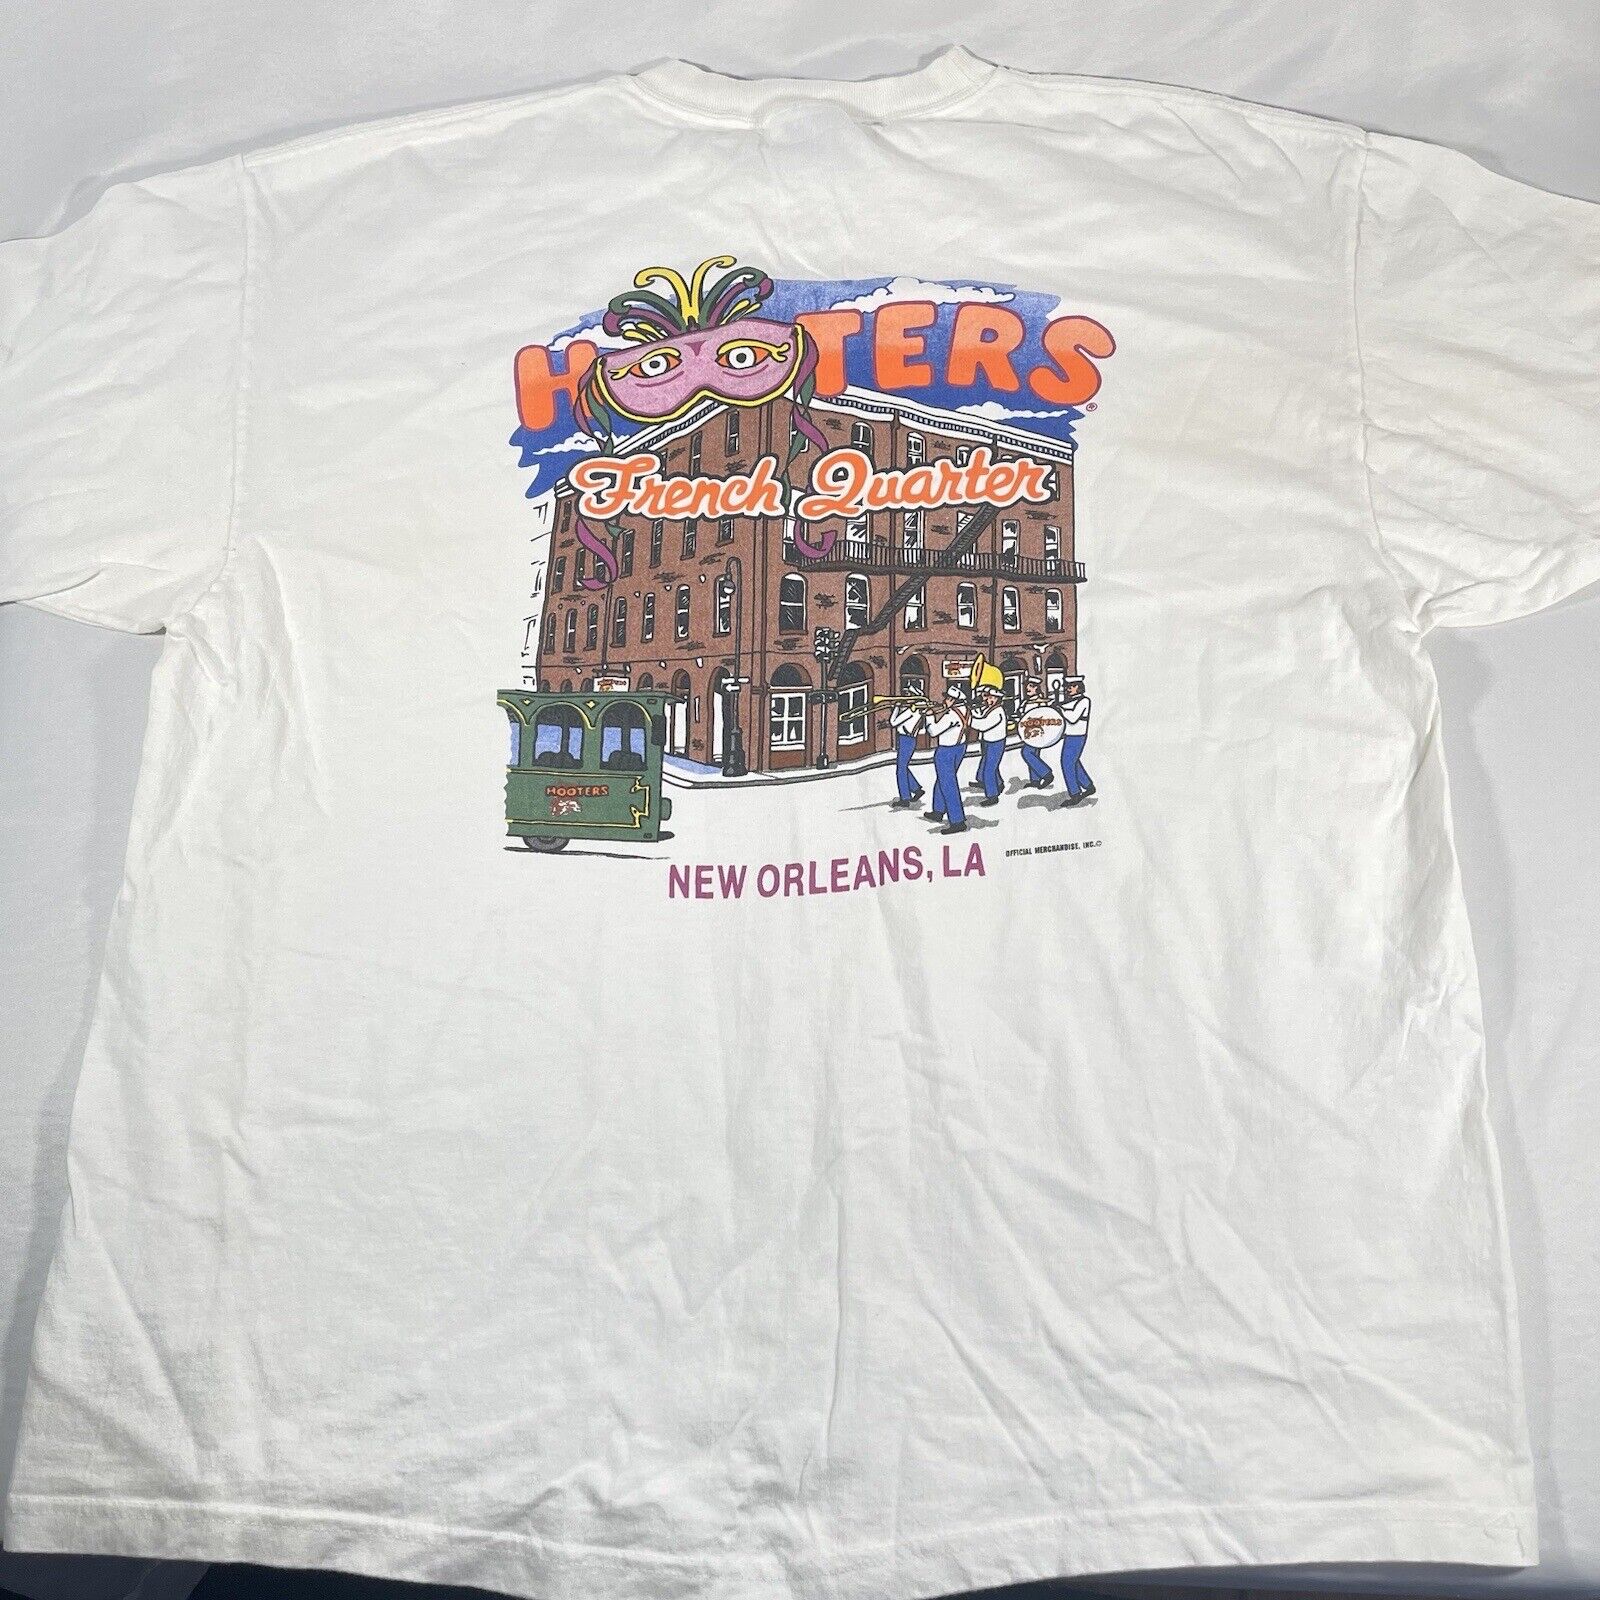 Hooters French Quarter New Orleans Men’s XL White T Shirt Skater Graphic